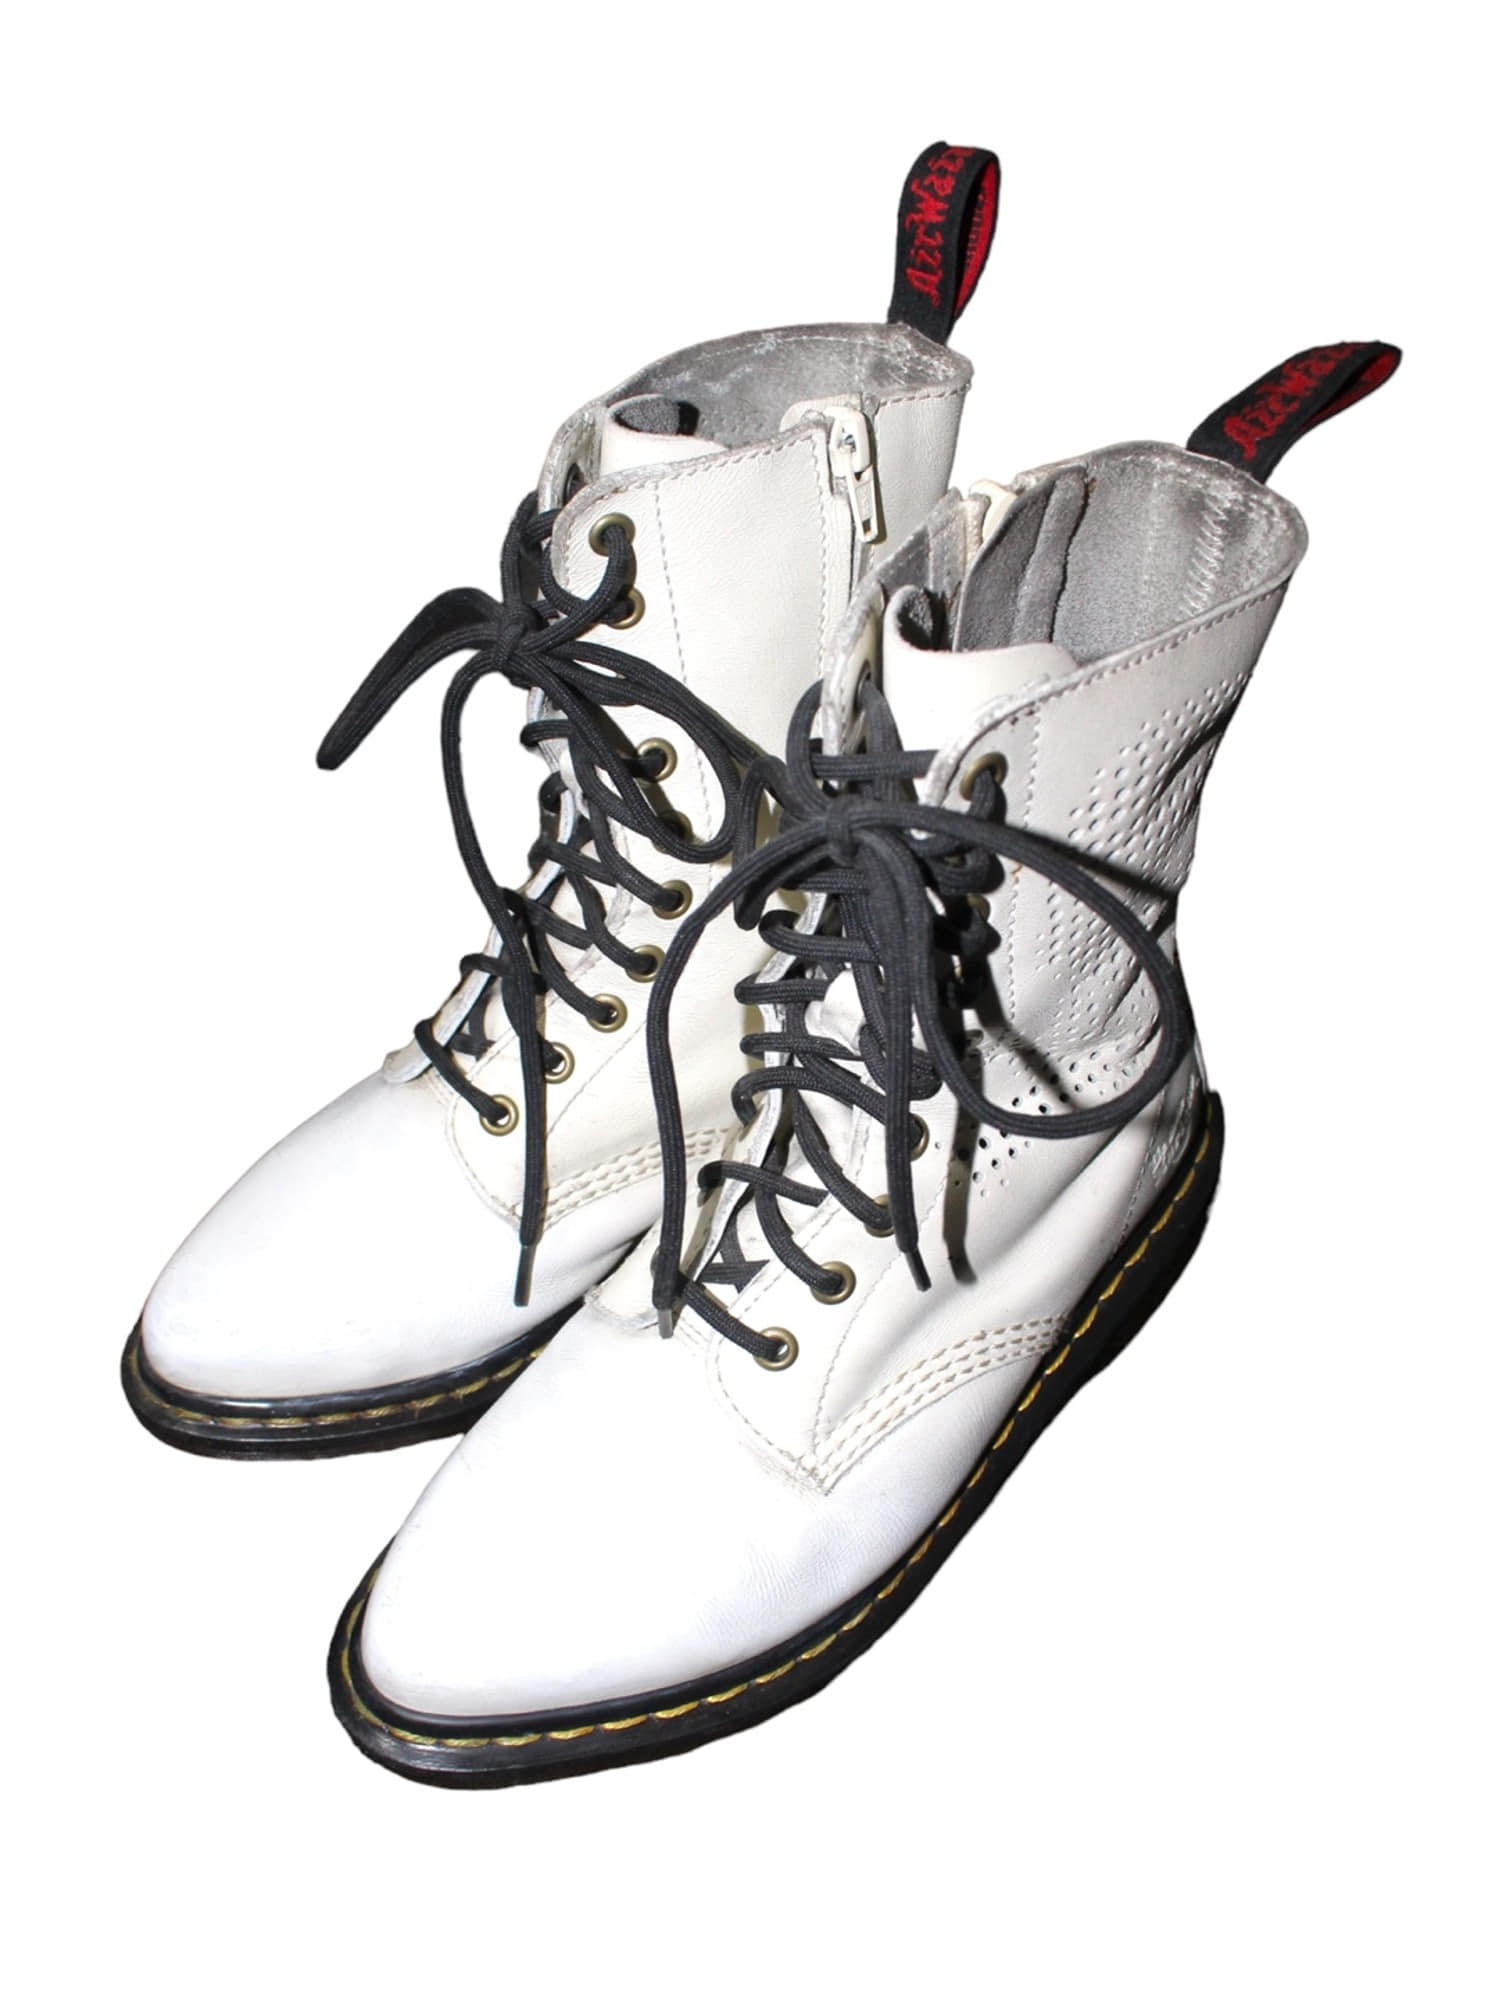 Dr. Martens AW009 10 Eye Smooth White Leather Mid Calf Combat Boots US 8 UK 5.5 EU 38 (Red Tab)